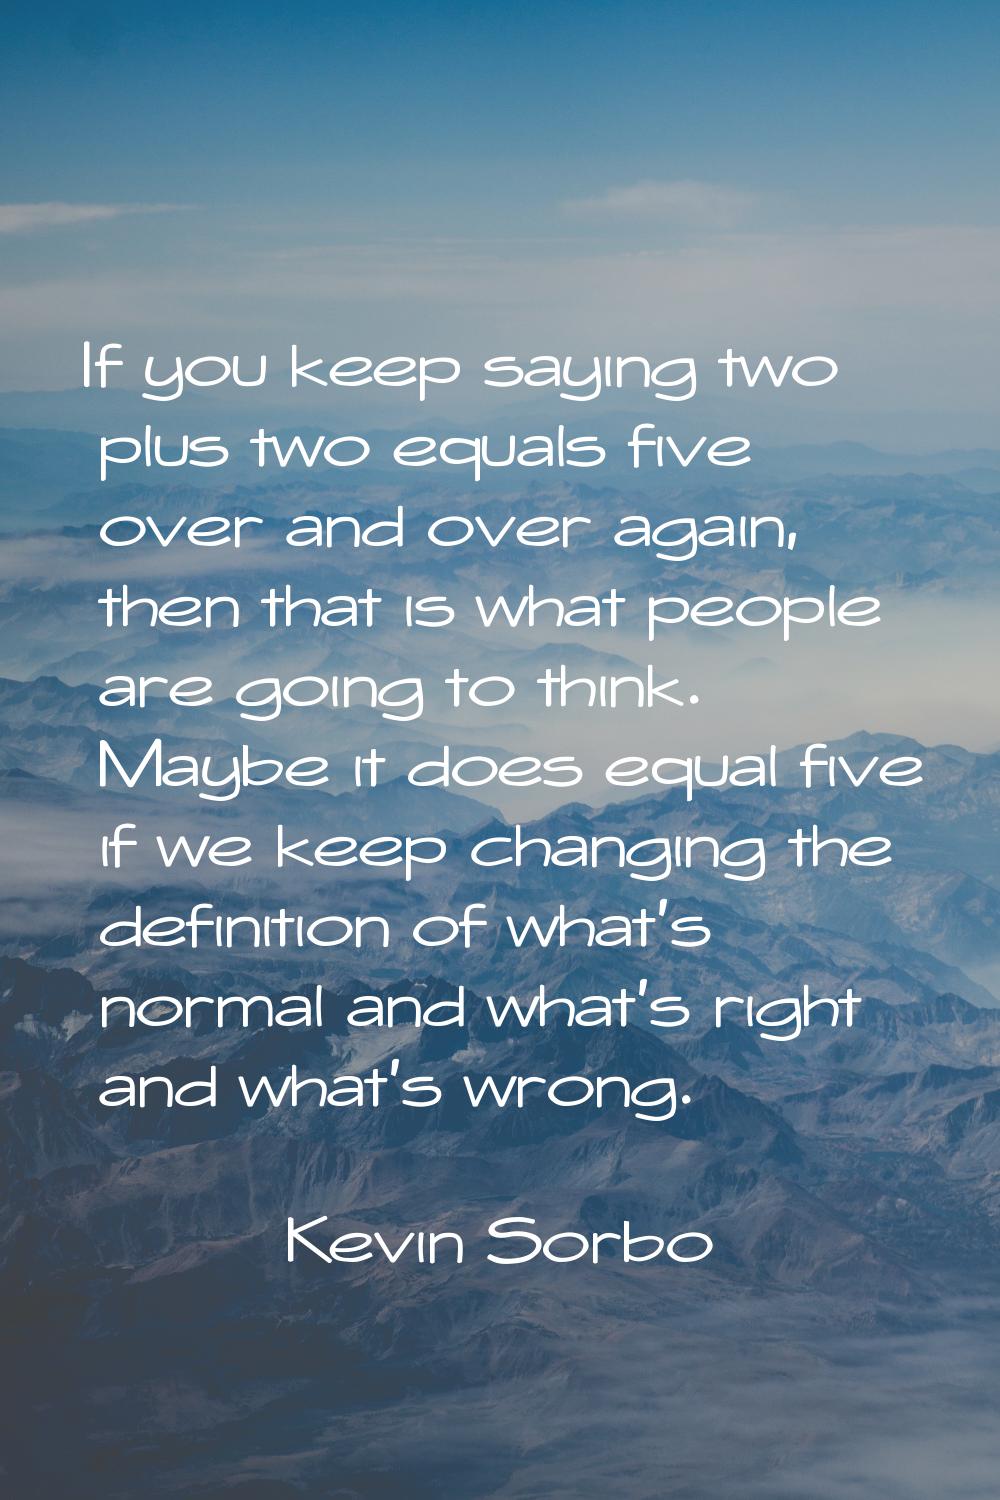 If you keep saying two plus two equals five over and over again, then that is what people are going